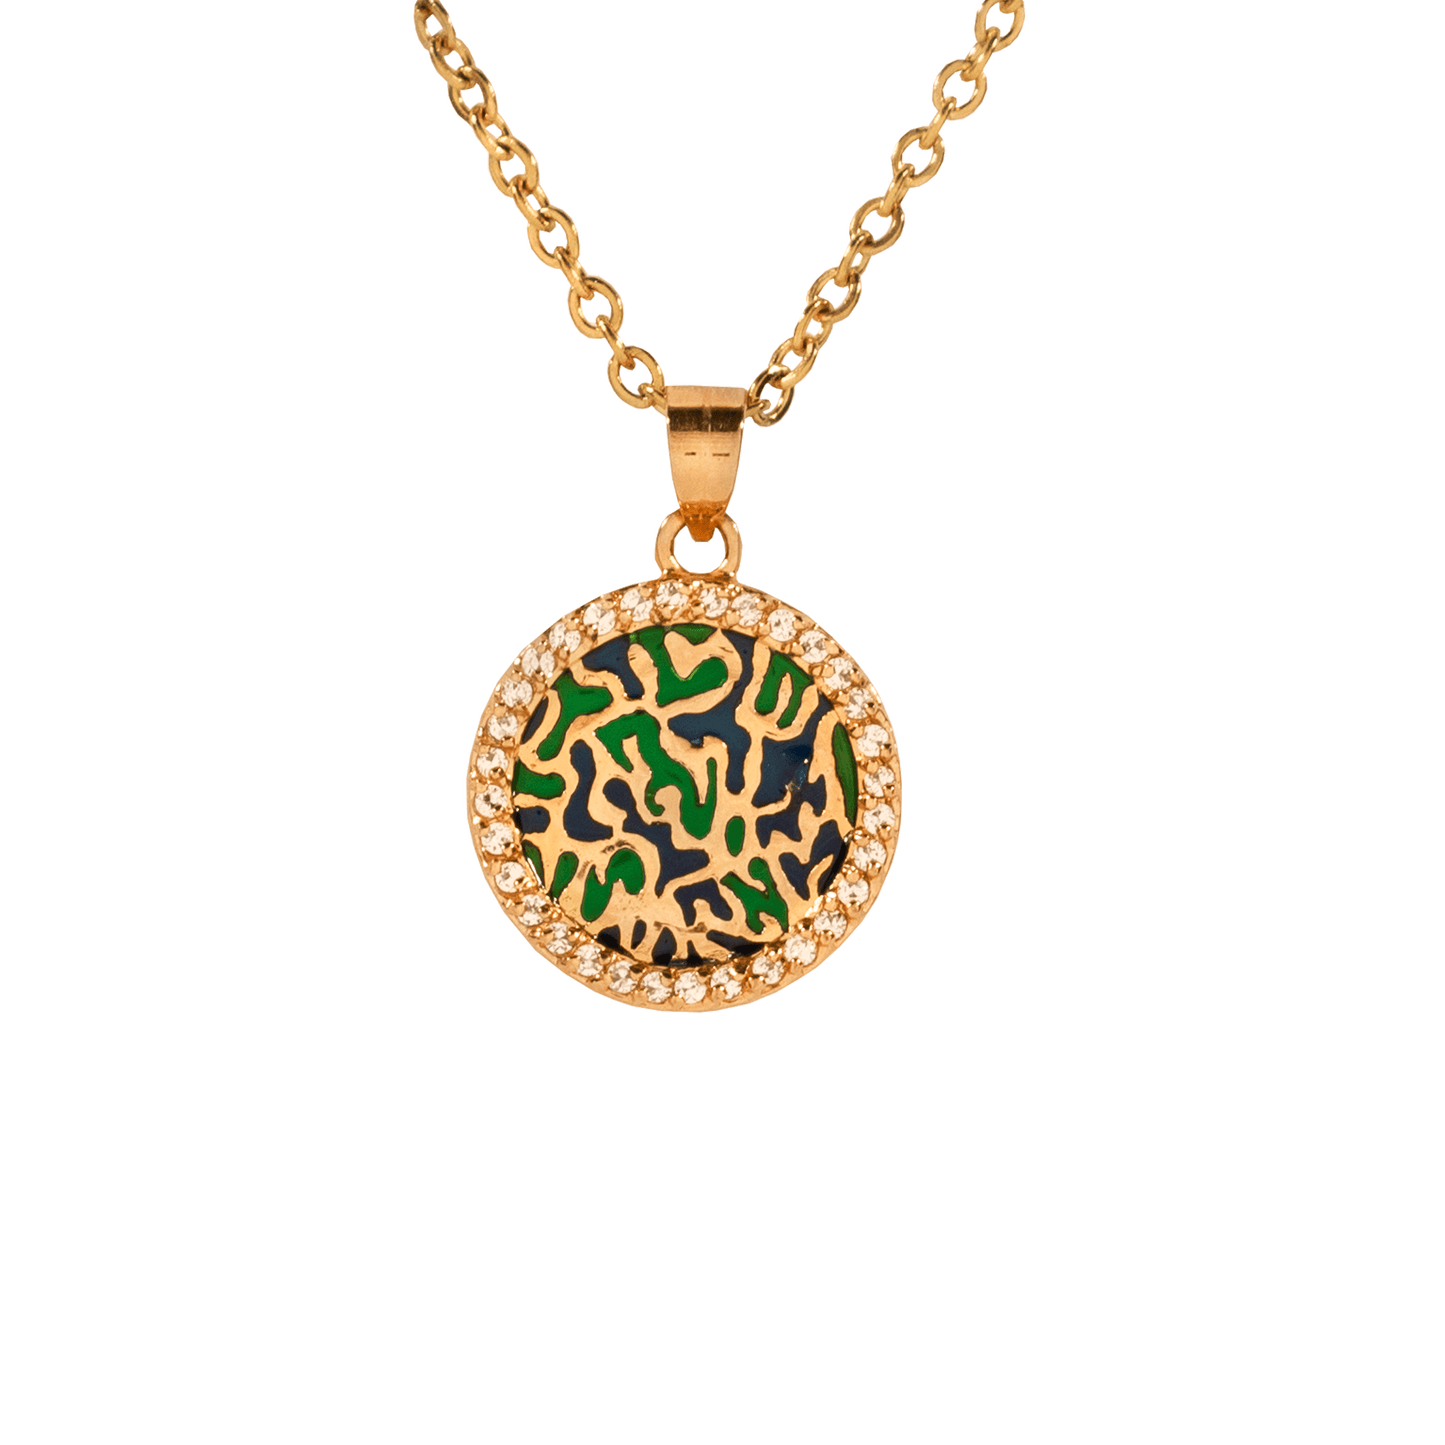 Eilat Stone Encased in a Gold Plated disc edged with crystals